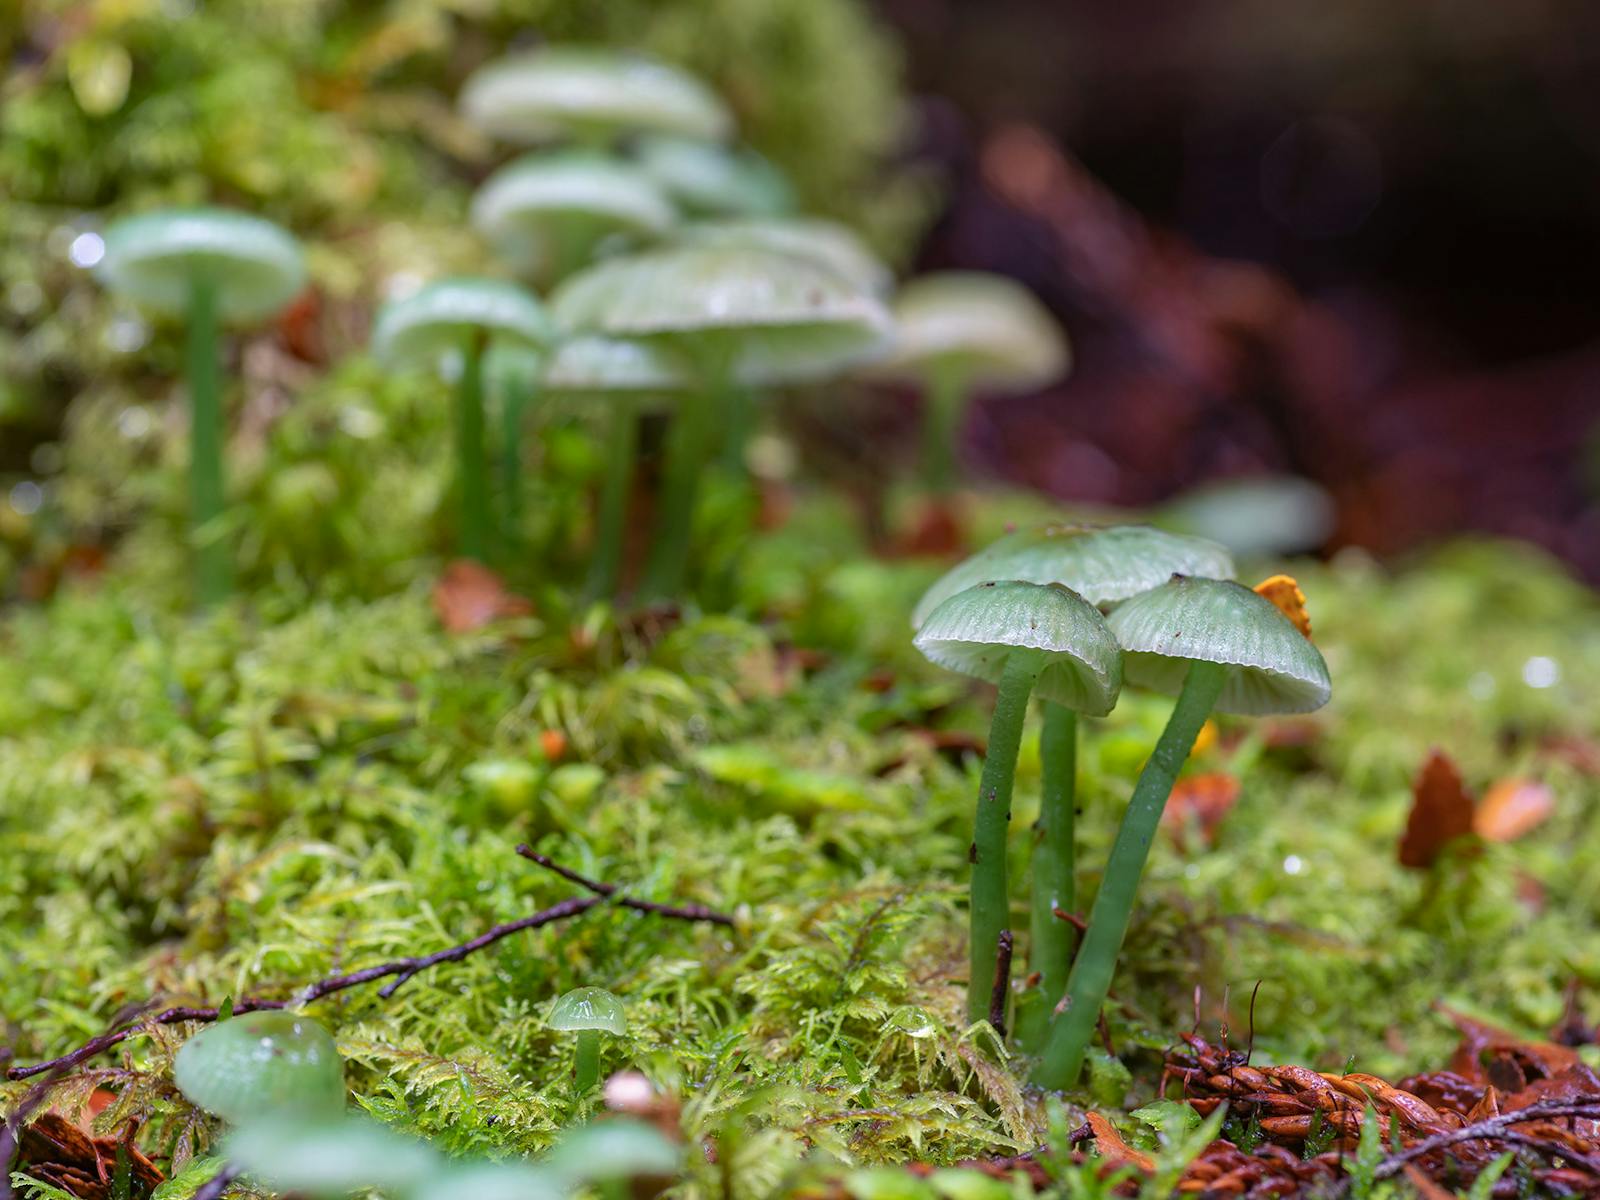 Fascinating green fungi in the rainforest at Cradle Mountain